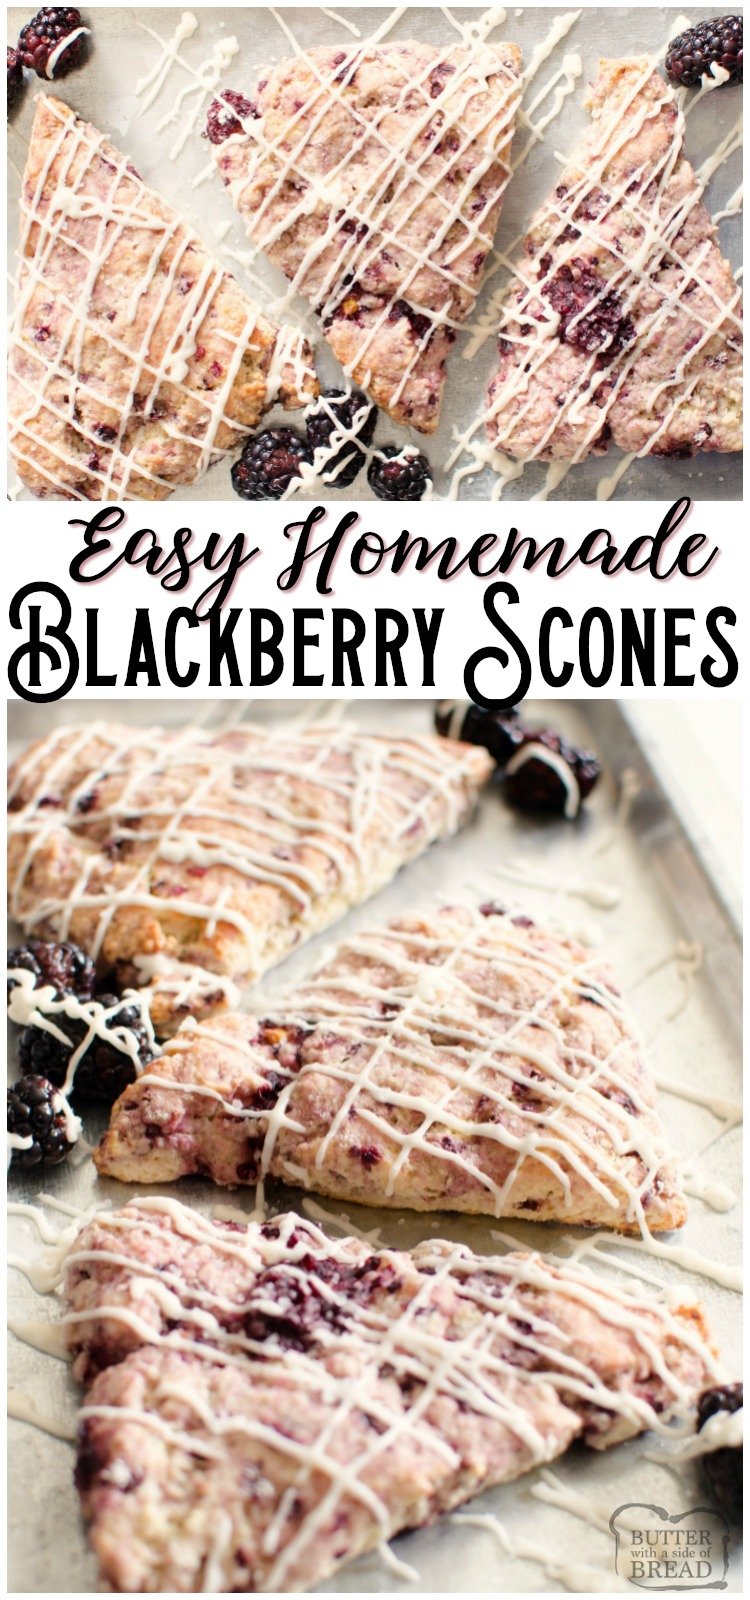 Easy Homemade Blackberry Scone recipe for buttery, soft & flavorful scones. Easily the best scone recipe ever! Good with blueberries & strawberries too!